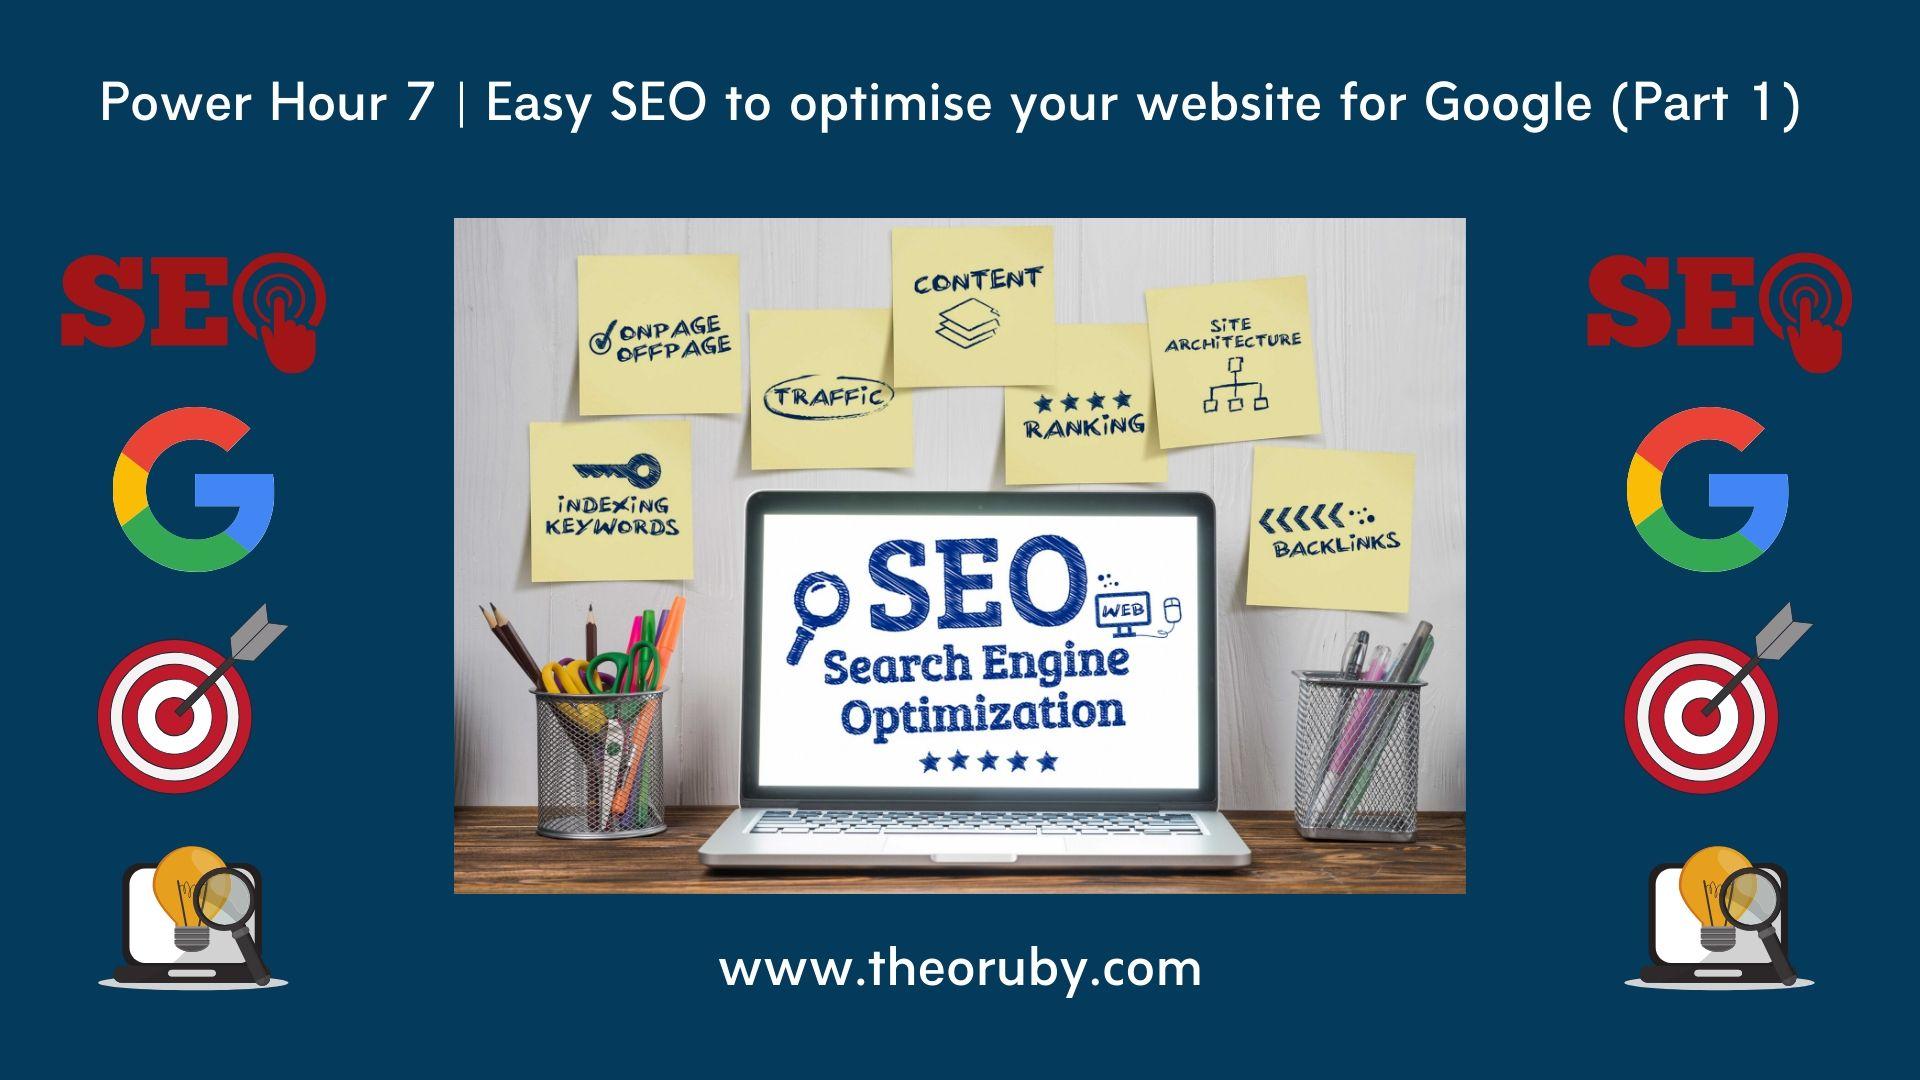 Power Hour 7 | Easy SEO to optimise your website for Google (Part 1) 1